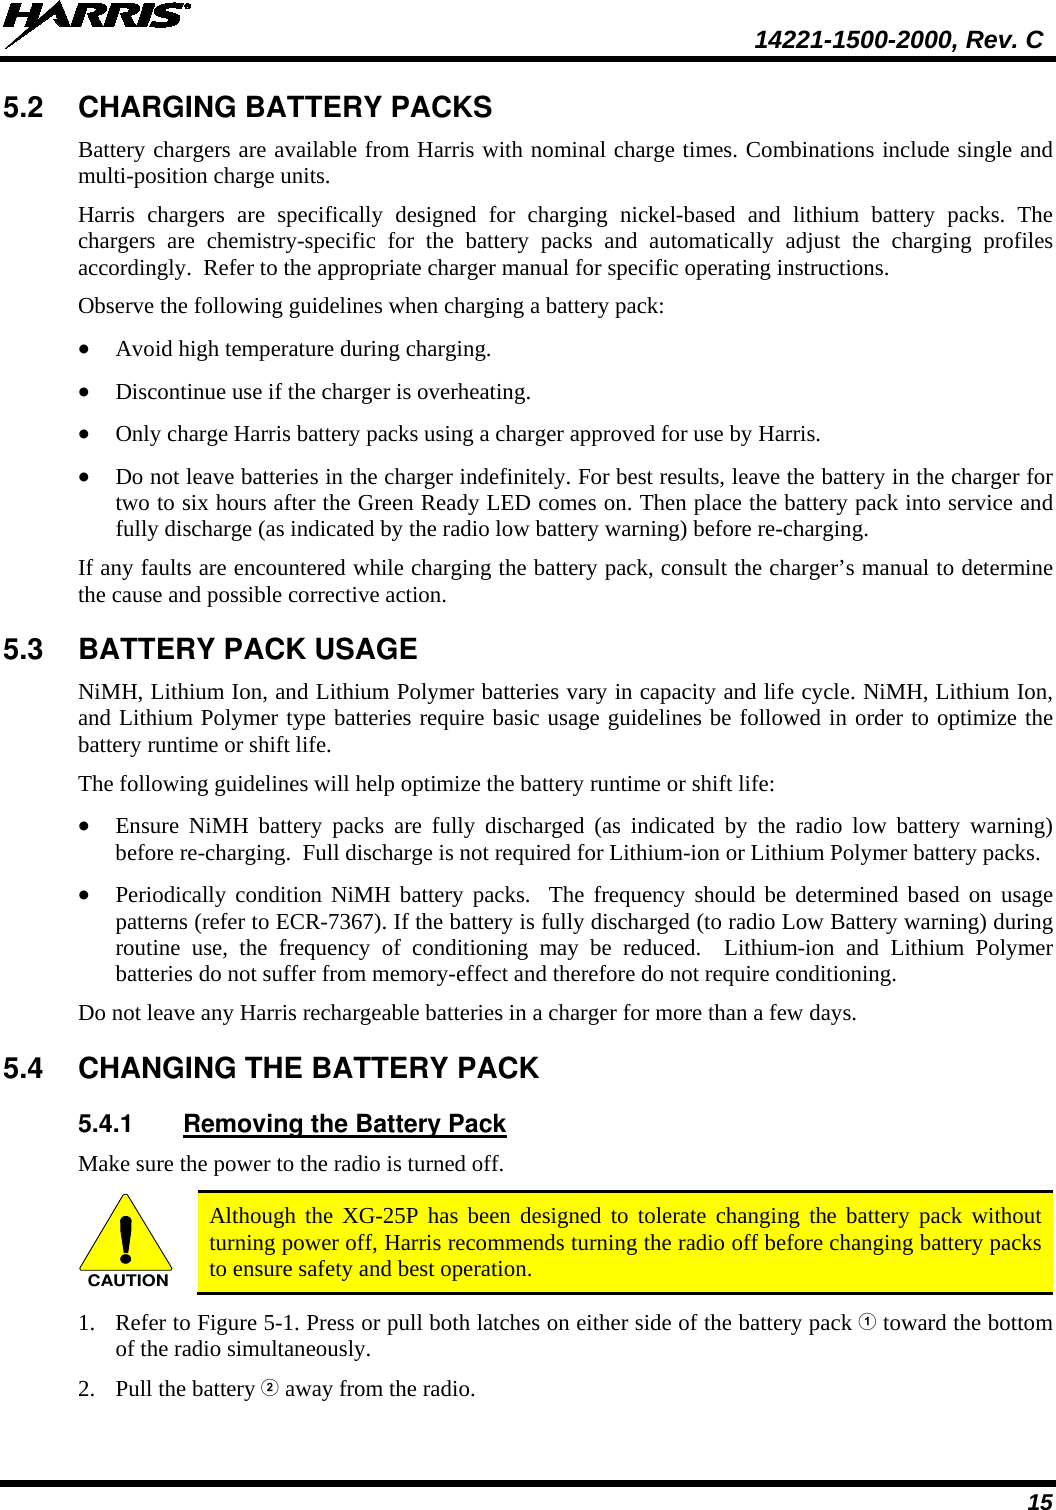  14221-1500-2000, Rev. C 15 5.2 CHARGING BATTERY PACKS Battery chargers are available from Harris with nominal charge times. Combinations include single and multi-position charge units.  Harris chargers are specifically designed for charging nickel-based and lithium battery packs. The chargers are chemistry-specific for the battery packs and automatically adjust the charging profiles accordingly.  Refer to the appropriate charger manual for specific operating instructions.  Observe the following guidelines when charging a battery pack: • Avoid high temperature during charging.  • Discontinue use if the charger is overheating. • Only charge Harris battery packs using a charger approved for use by Harris. • Do not leave batteries in the charger indefinitely. For best results, leave the battery in the charger for two to six hours after the Green Ready LED comes on. Then place the battery pack into service and fully discharge (as indicated by the radio low battery warning) before re-charging. If any faults are encountered while charging the battery pack, consult the charger’s manual to determine the cause and possible corrective action. 5.3 BATTERY PACK USAGE NiMH, Lithium Ion, and Lithium Polymer batteries vary in capacity and life cycle. NiMH, Lithium Ion, and Lithium Polymer type batteries require basic usage guidelines be followed in order to optimize the battery runtime or shift life. The following guidelines will help optimize the battery runtime or shift life: • Ensure  NiMH battery packs are fully discharged (as indicated by the radio low battery warning) before re-charging.  Full discharge is not required for Lithium-ion or Lithium Polymer battery packs. • Periodically condition NiMH  battery packs.  The frequency should be determined based on usage patterns (refer to ECR-7367). If the battery is fully discharged (to radio Low Battery warning) during routine use, the frequency of conditioning may be reduced.  Lithium-ion  and Lithium Polymer batteries do not suffer from memory-effect and therefore do not require conditioning. Do not leave any Harris rechargeable batteries in a charger for more than a few days.  5.4 CHANGING THE BATTERY PACK 5.4.1 Removing the Battery Pack Make sure the power to the radio is turned off. CAUTION Although the XG-25P has been designed to tolerate changing the battery pack without turning power off, Harris recommends turning the radio off before changing battery packs to ensure safety and best operation. 1. Refer to Figure 5-1. Press or pull both latches on either side of the battery pack  toward the bottom of the radio simultaneously.  2. Pull the battery  away from the radio. 